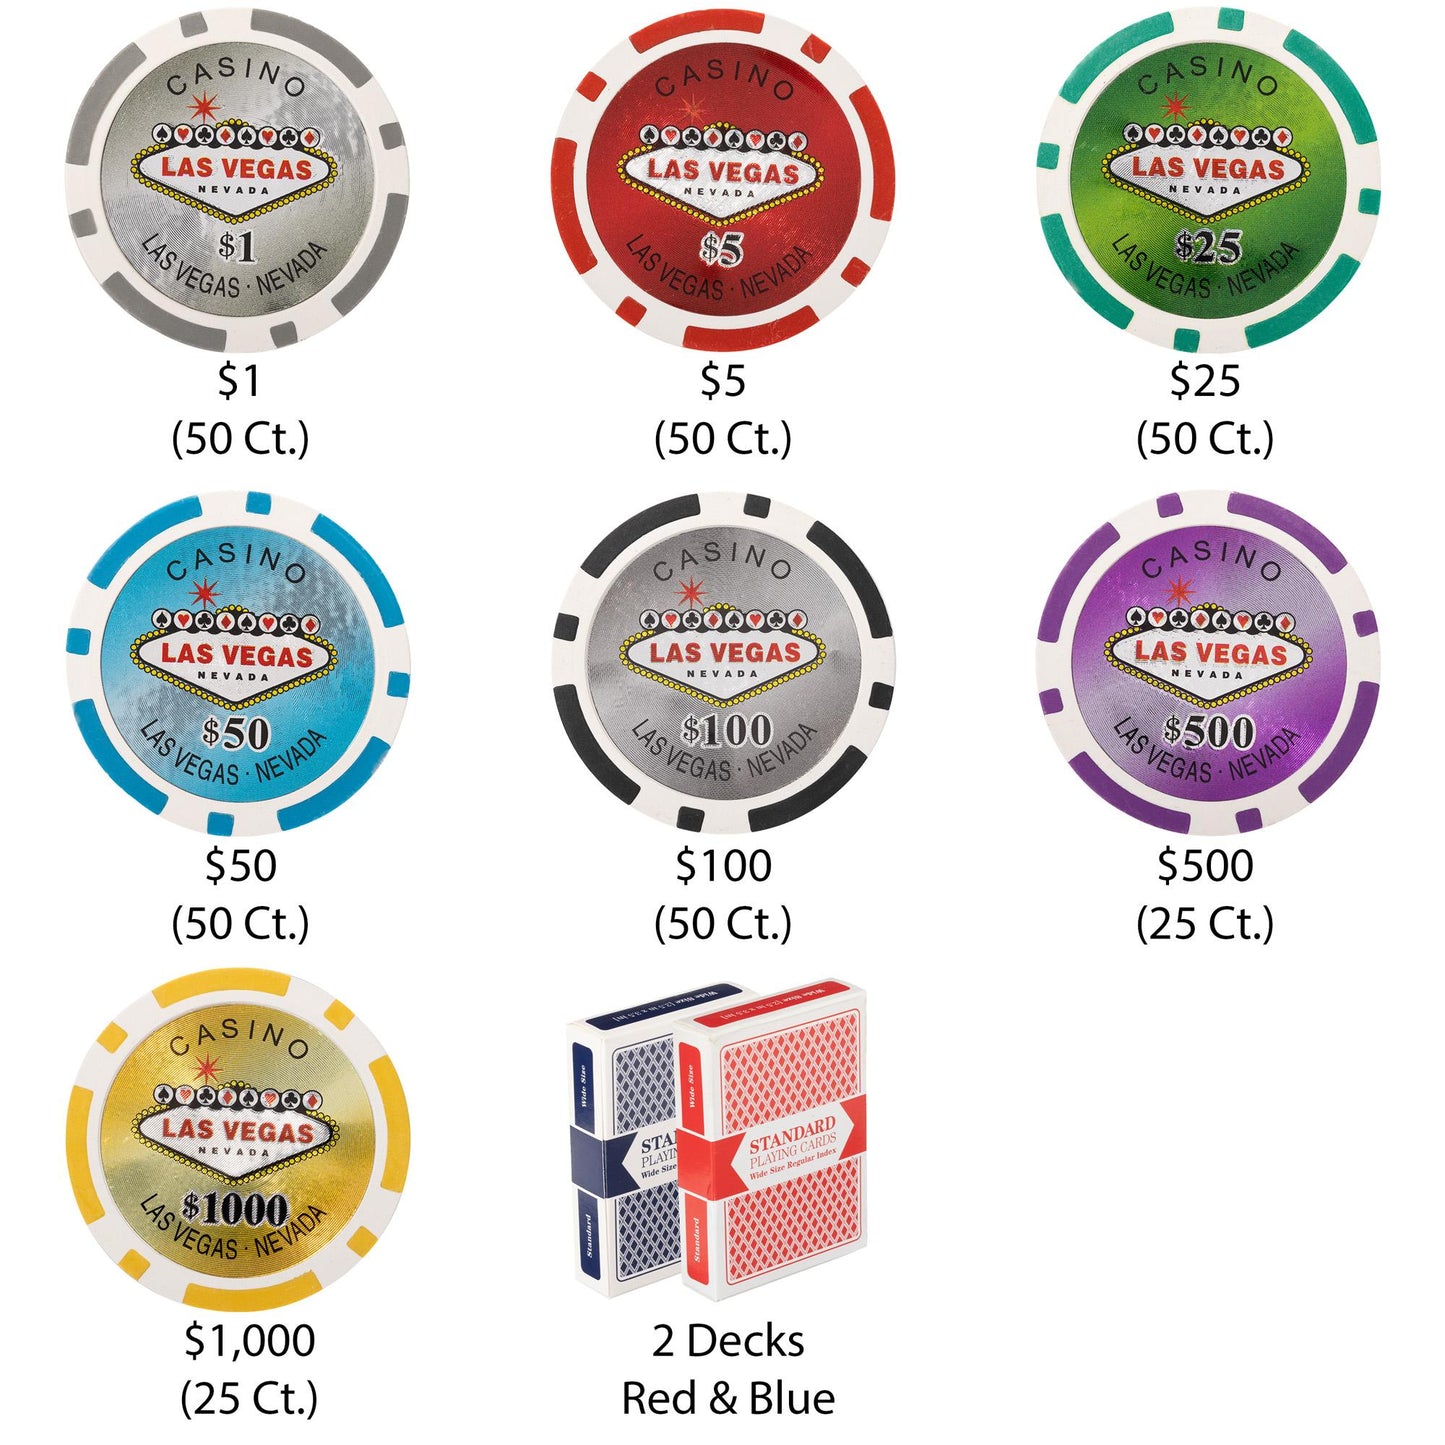 300 Las Vegas Poker Chips with Wooden Carousel